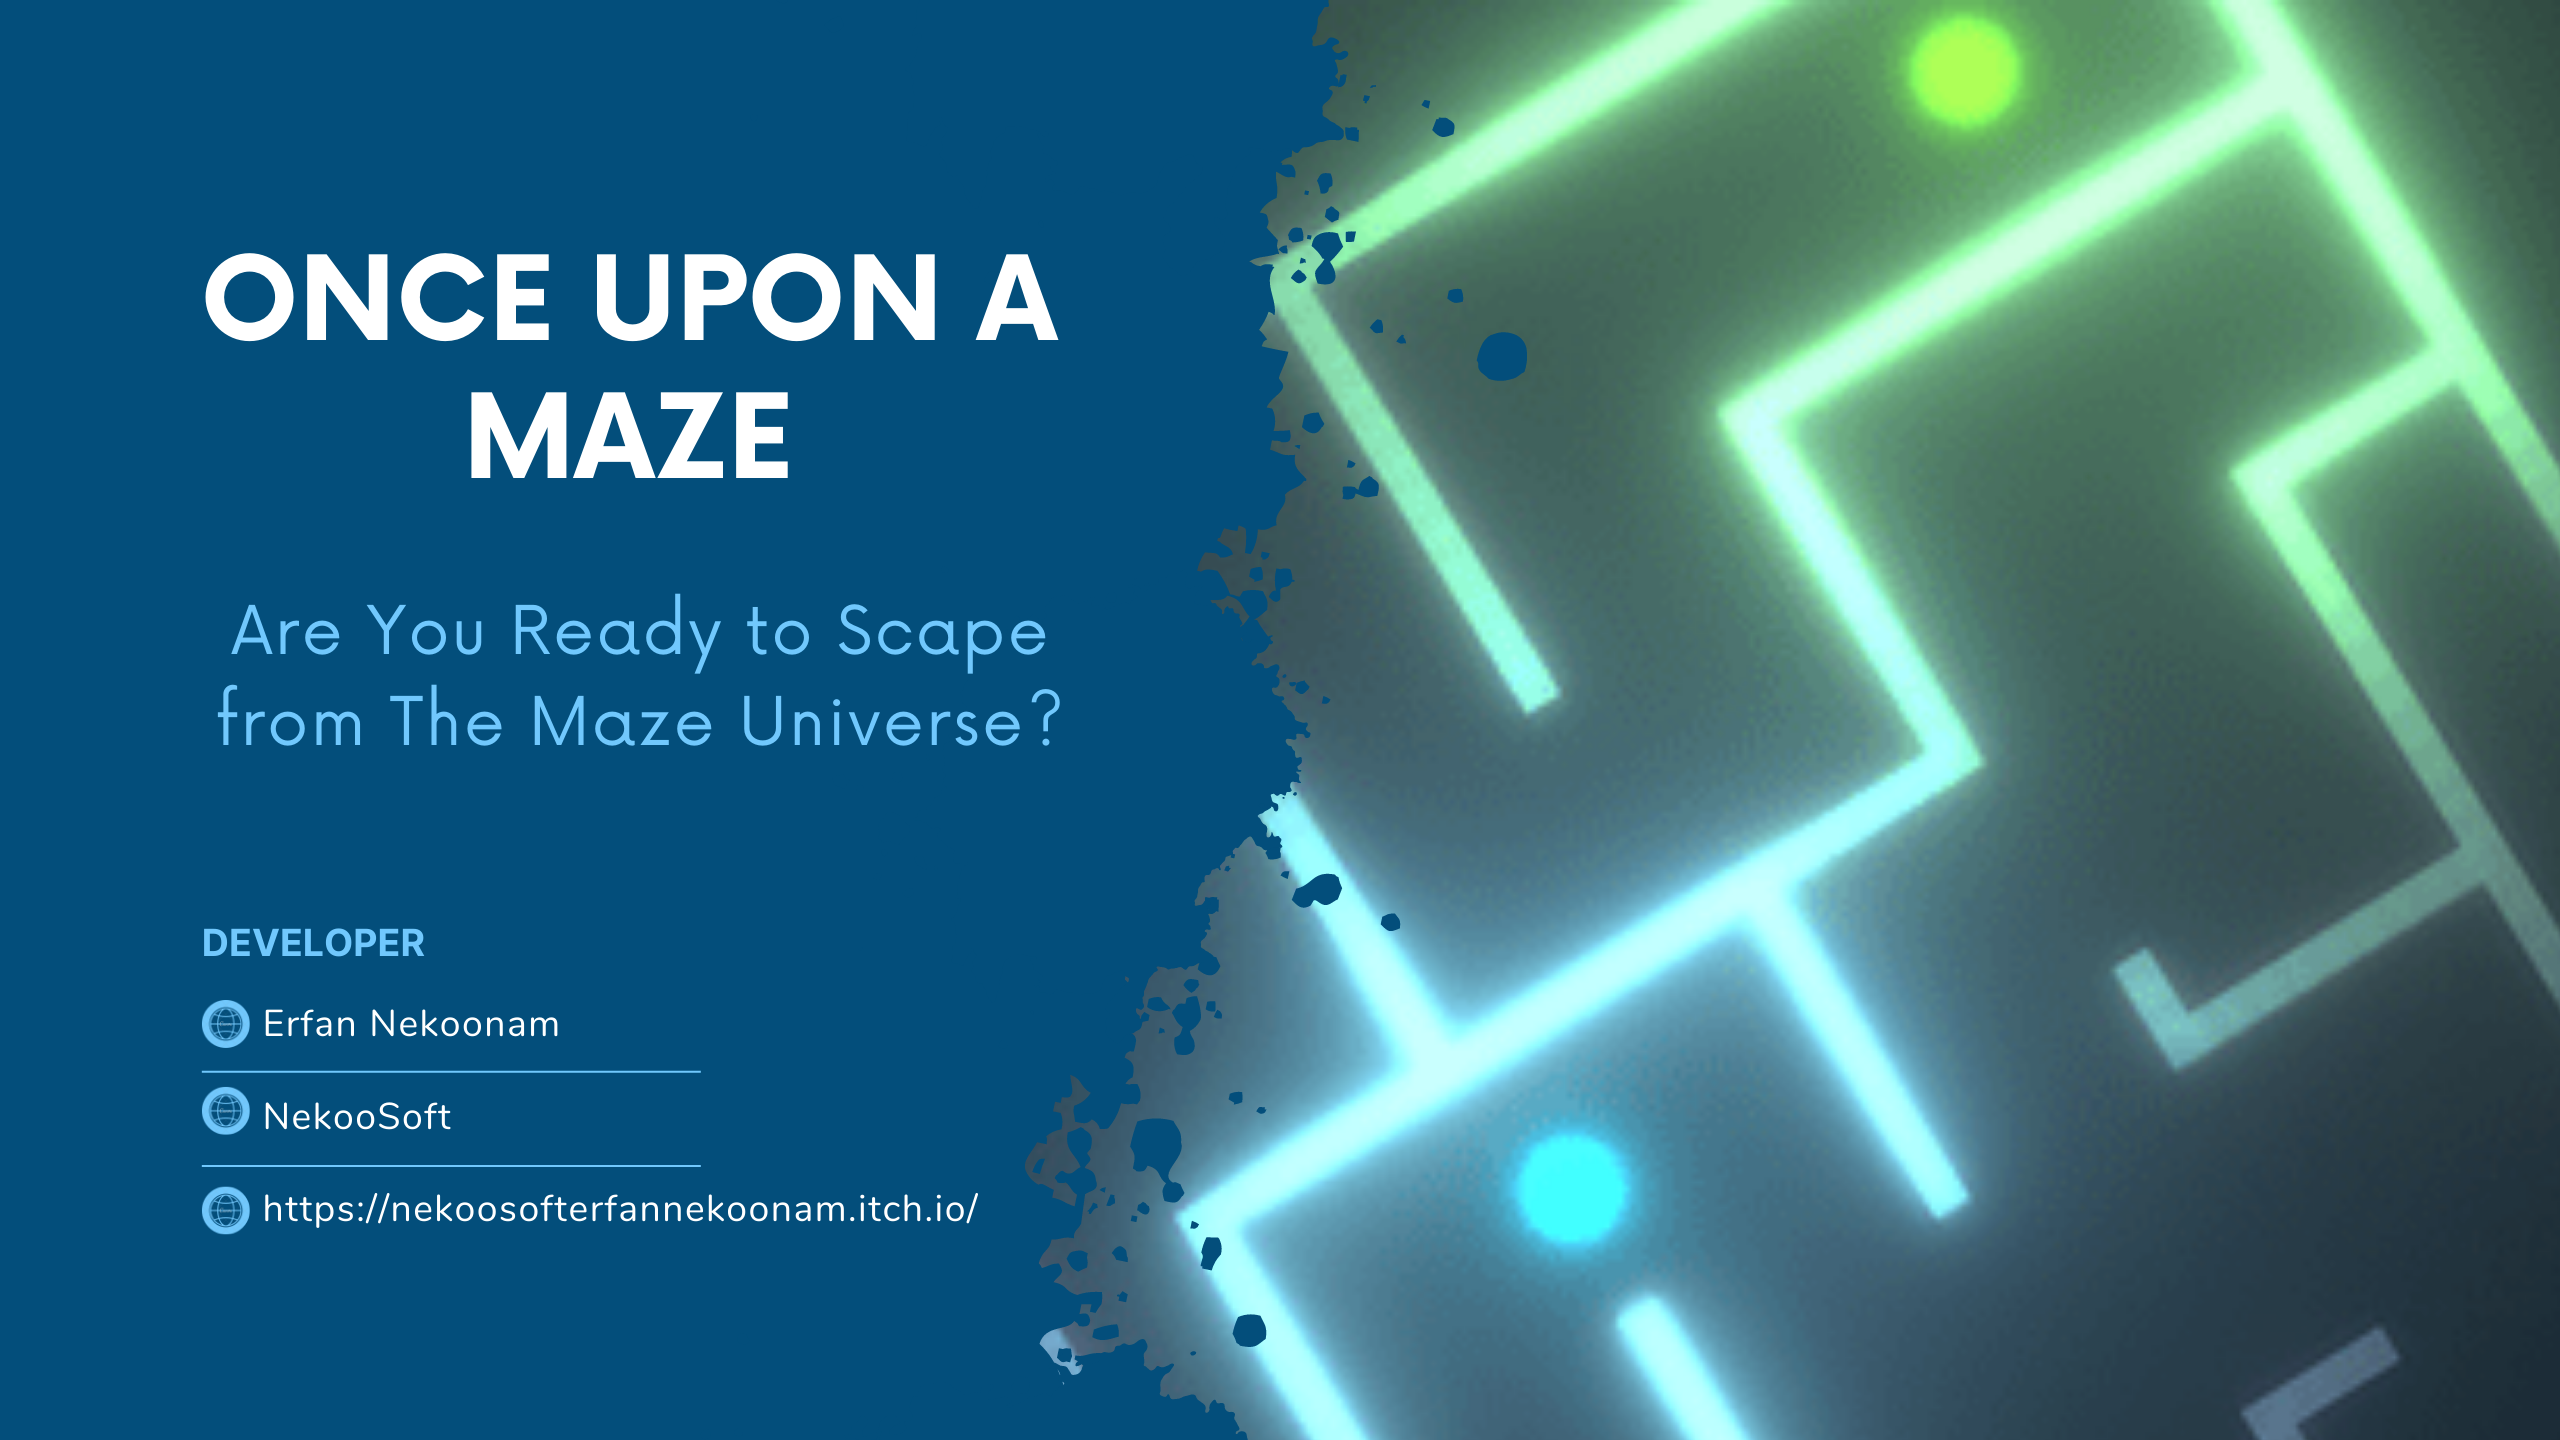 Once Upon a Maze